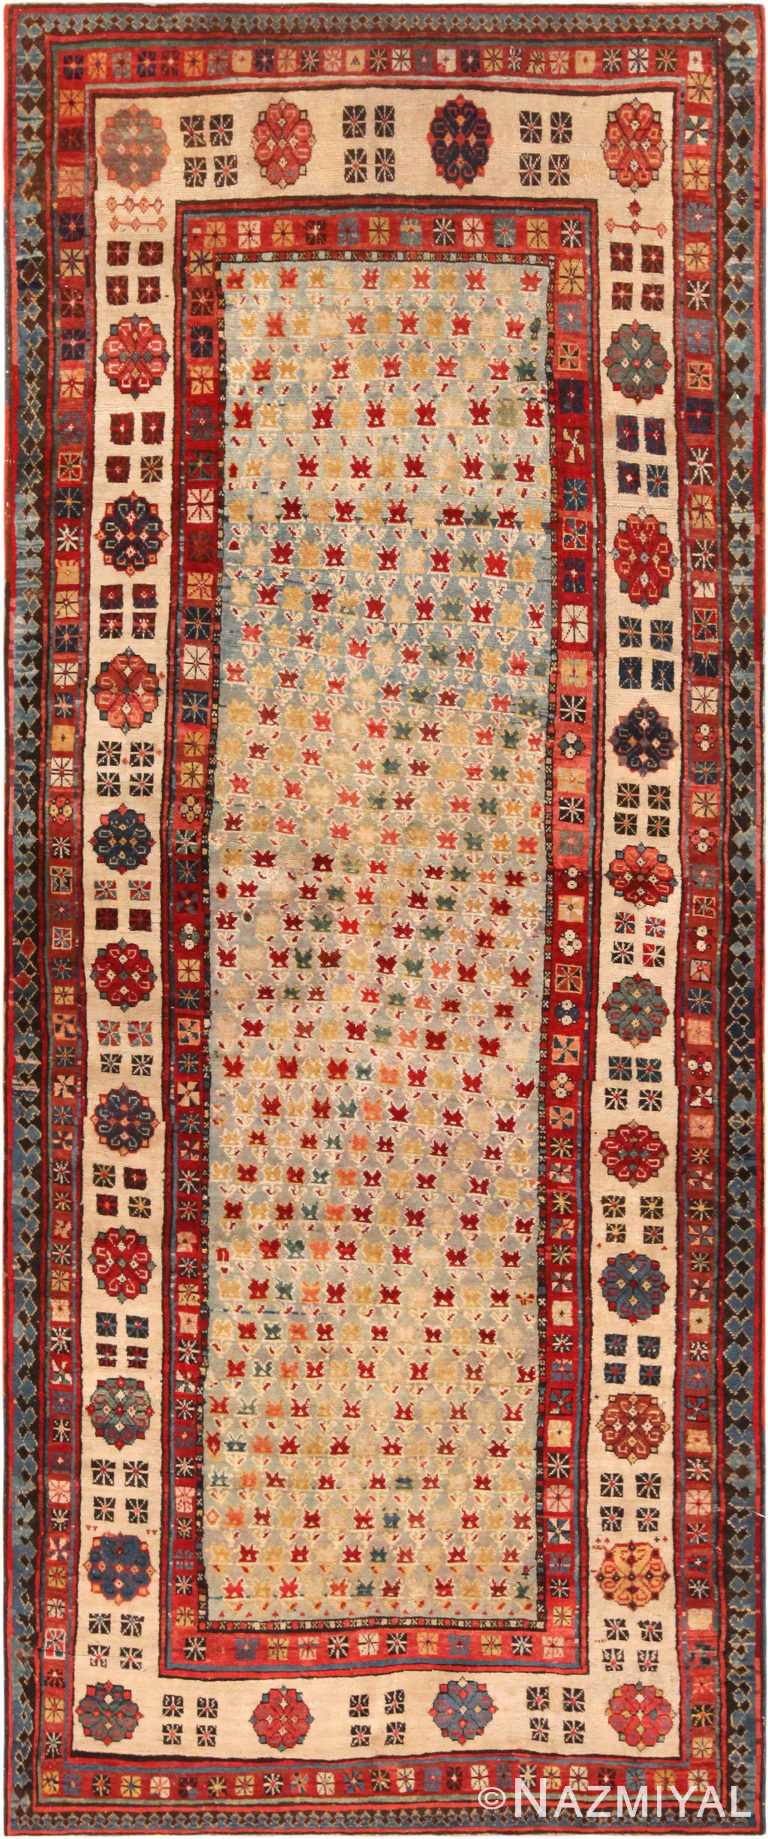 Antique Caucasian Talish Rug 72190 by Nazmiyal Antique Rugs